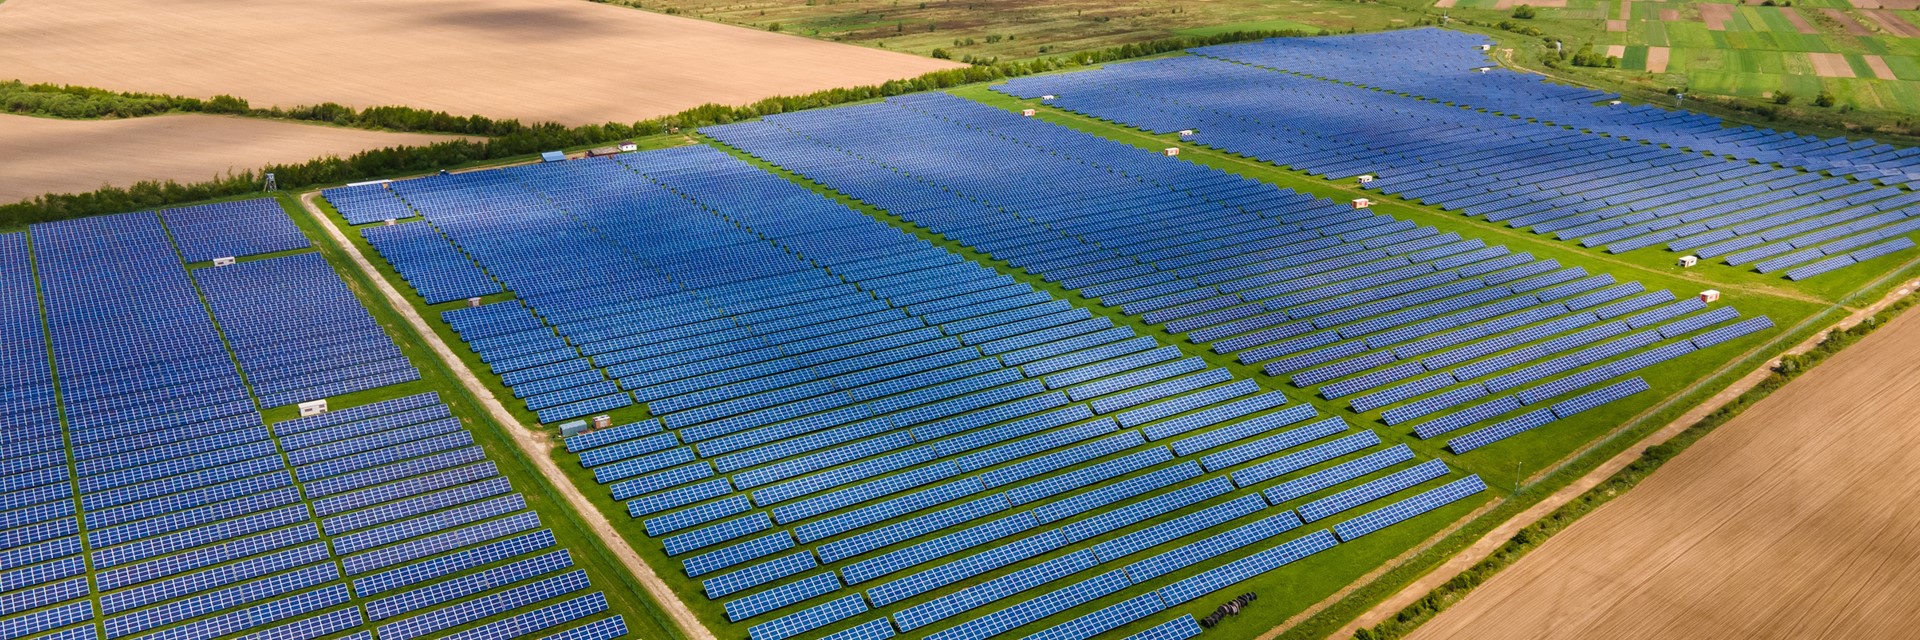 Aerial View Big Sustainable Electric Power Plant With Many Rows Solar Photovoltaic Panels